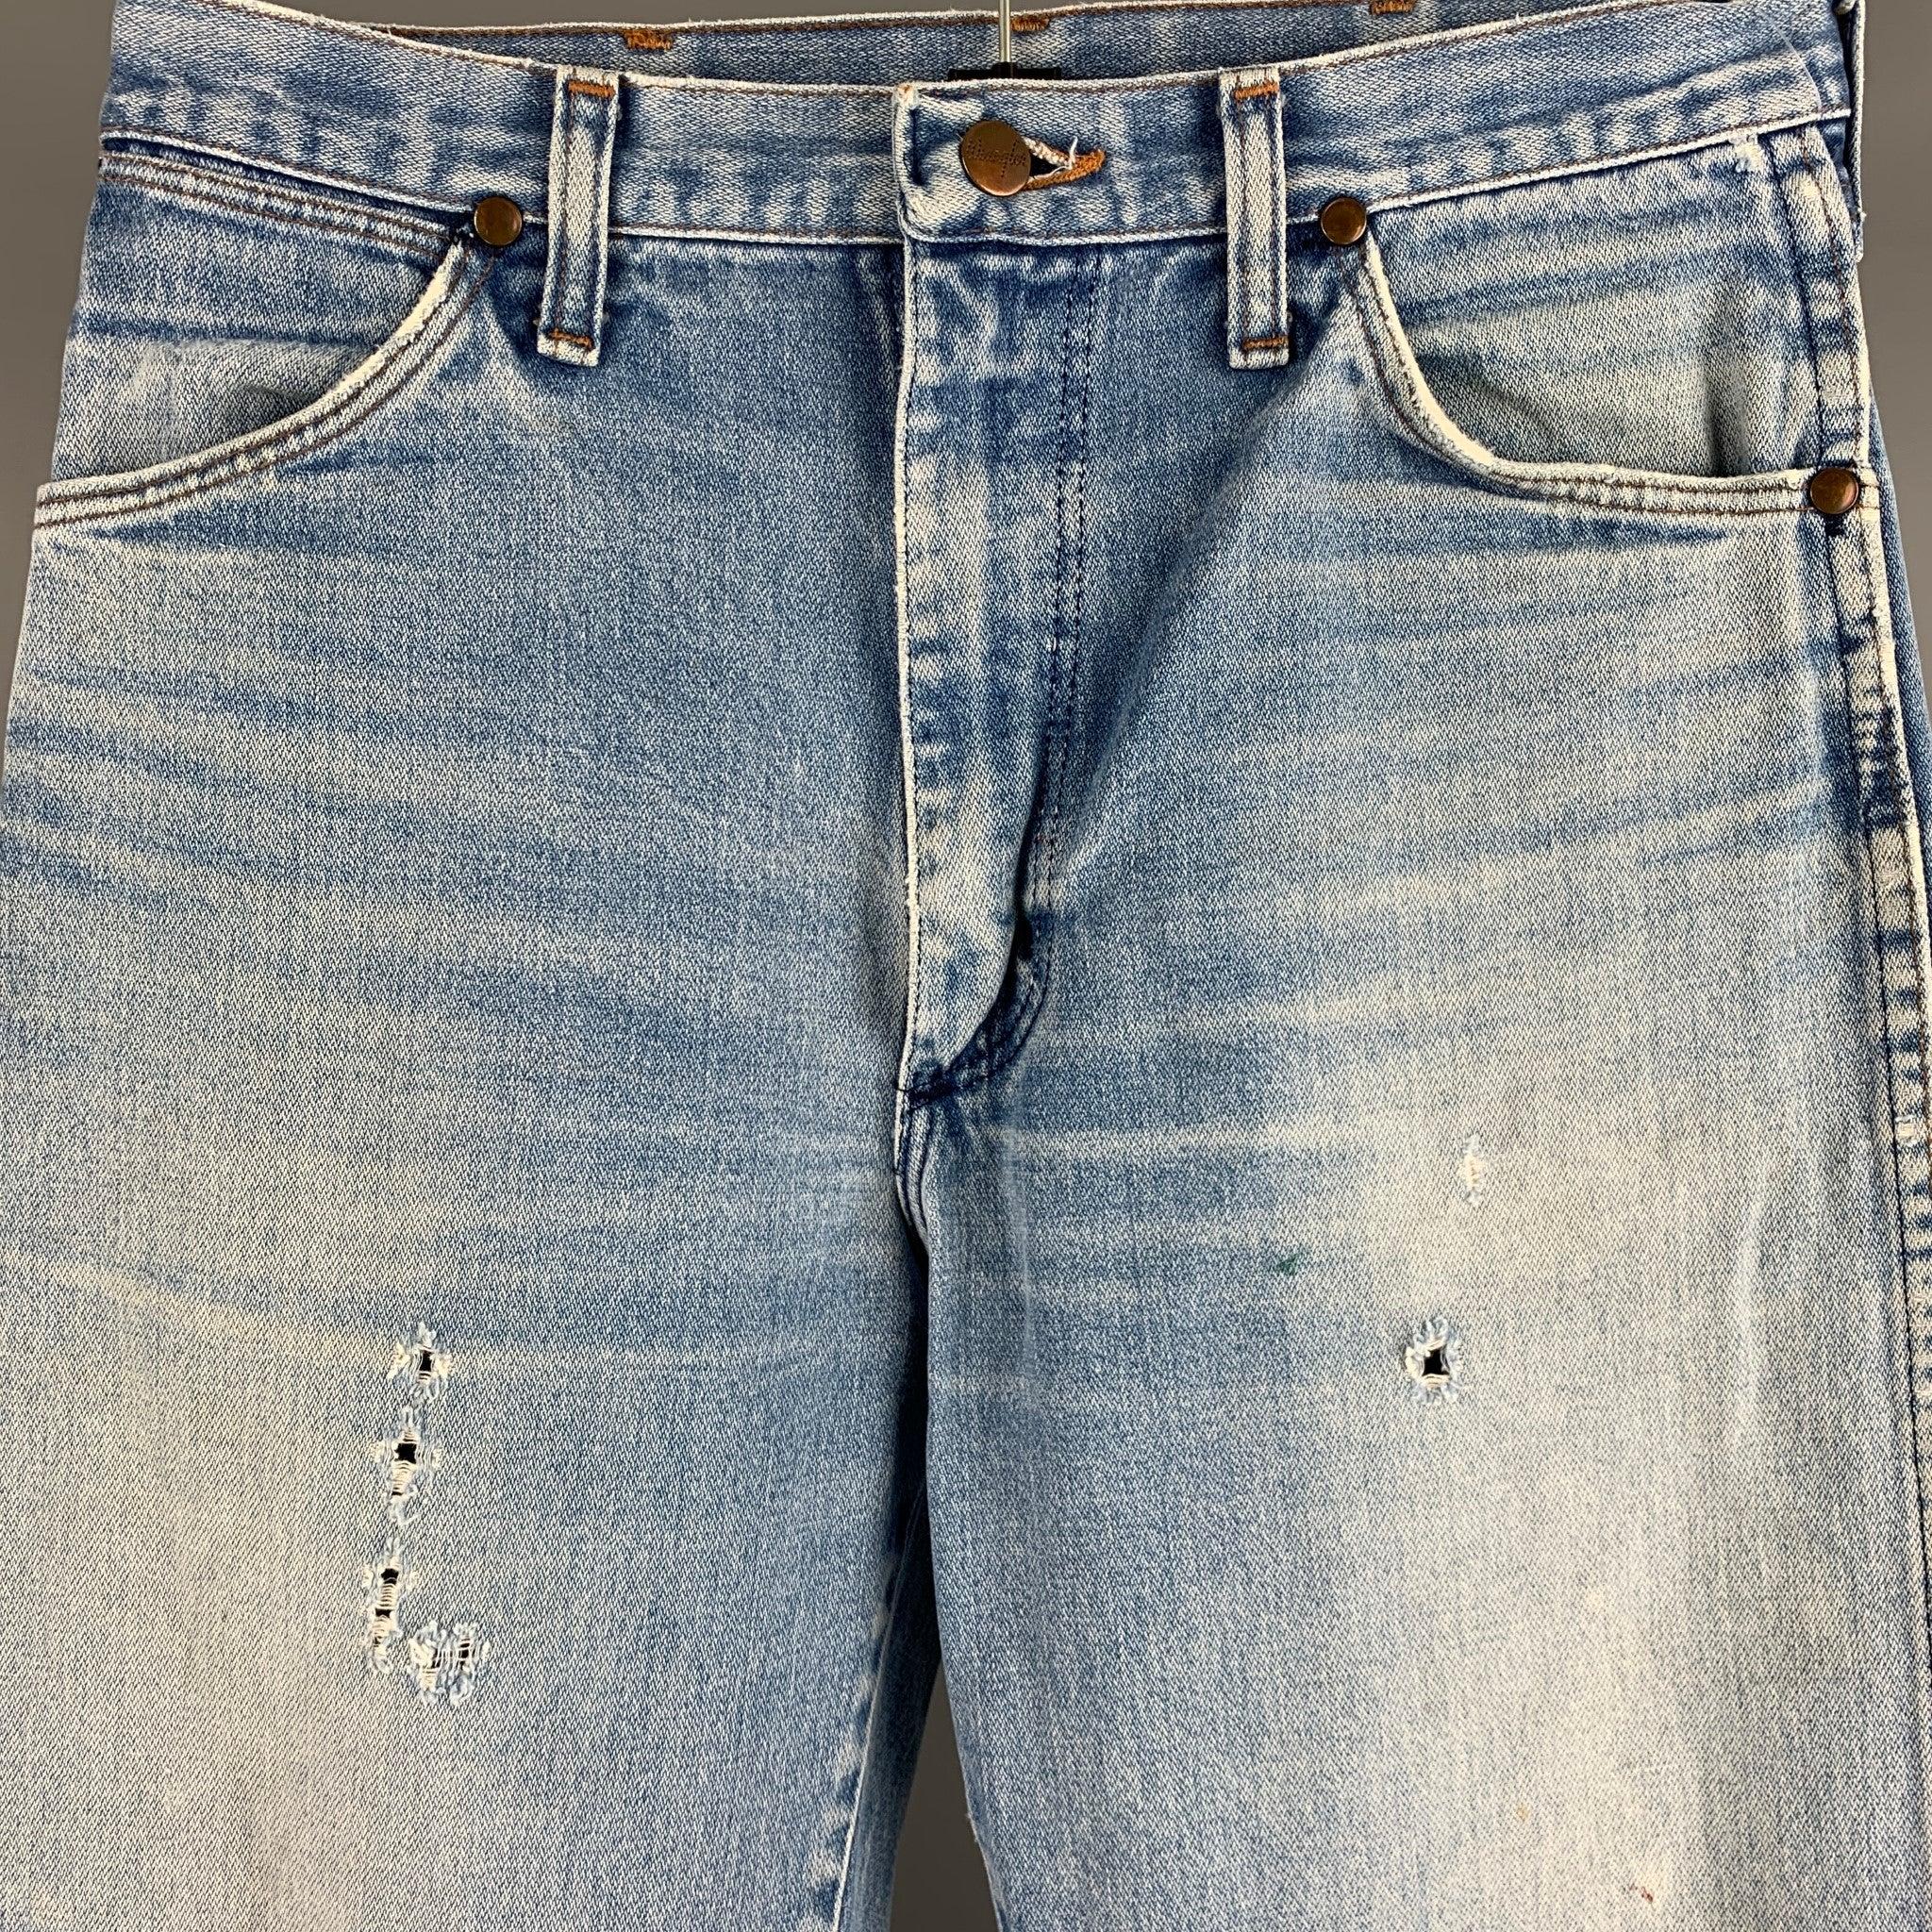 WRANGLER
jeans in a blue denim fabric featuring a straight leg, distressed details, and zipper fly closure.Very Good Pre-Owned Condition. Moderate signs of wear. 

Marked:   4LZYY403C 

Measurements: 
  Waist: 31 inches Rise: 10 inches Inseam: 35